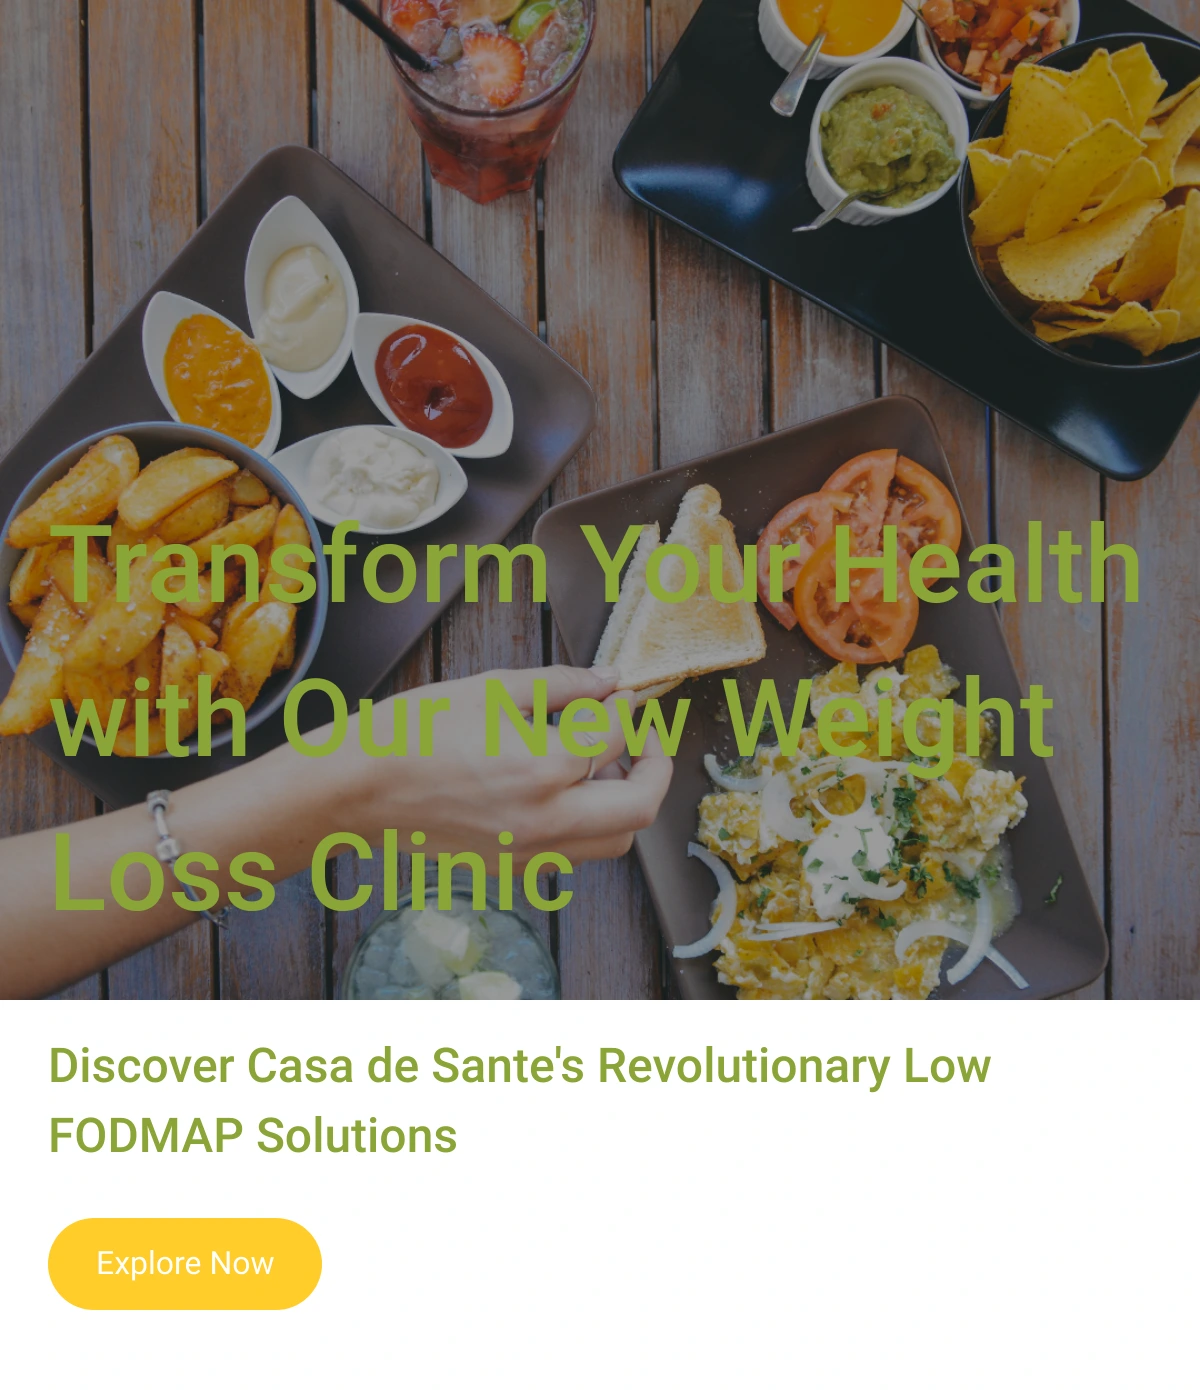  Transform Your Health with Our New Weight Loss Clinic Discover Casa de Sante's Revolutionary Low FODMAP Solutions Explore Now